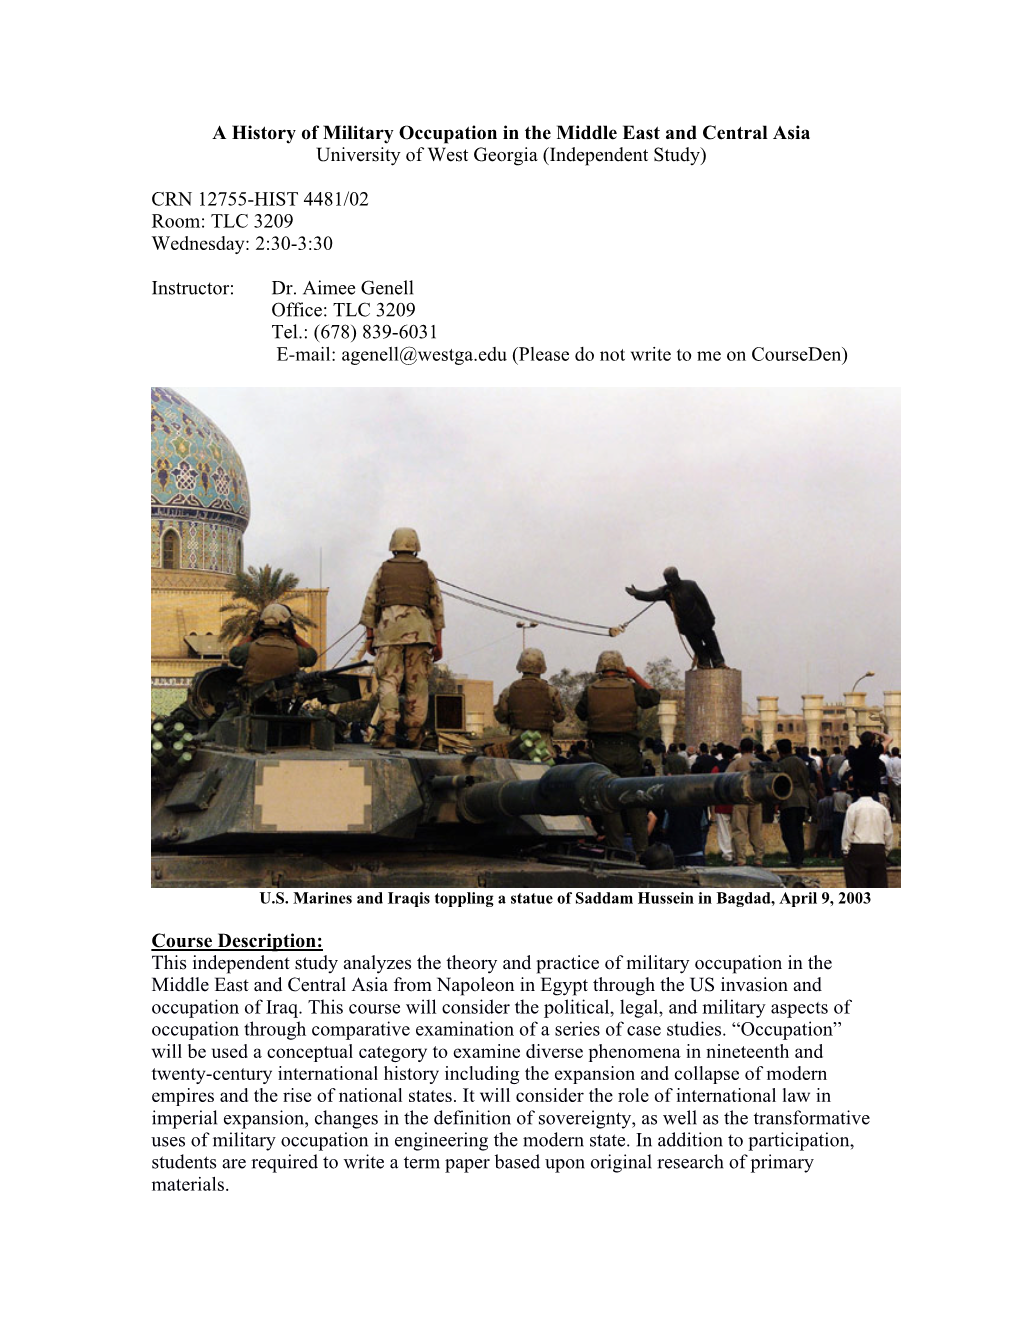 A History of Military Occupation in the Middle East and Central Asia University of West Georgia (Independent Study) CRN 12755-H